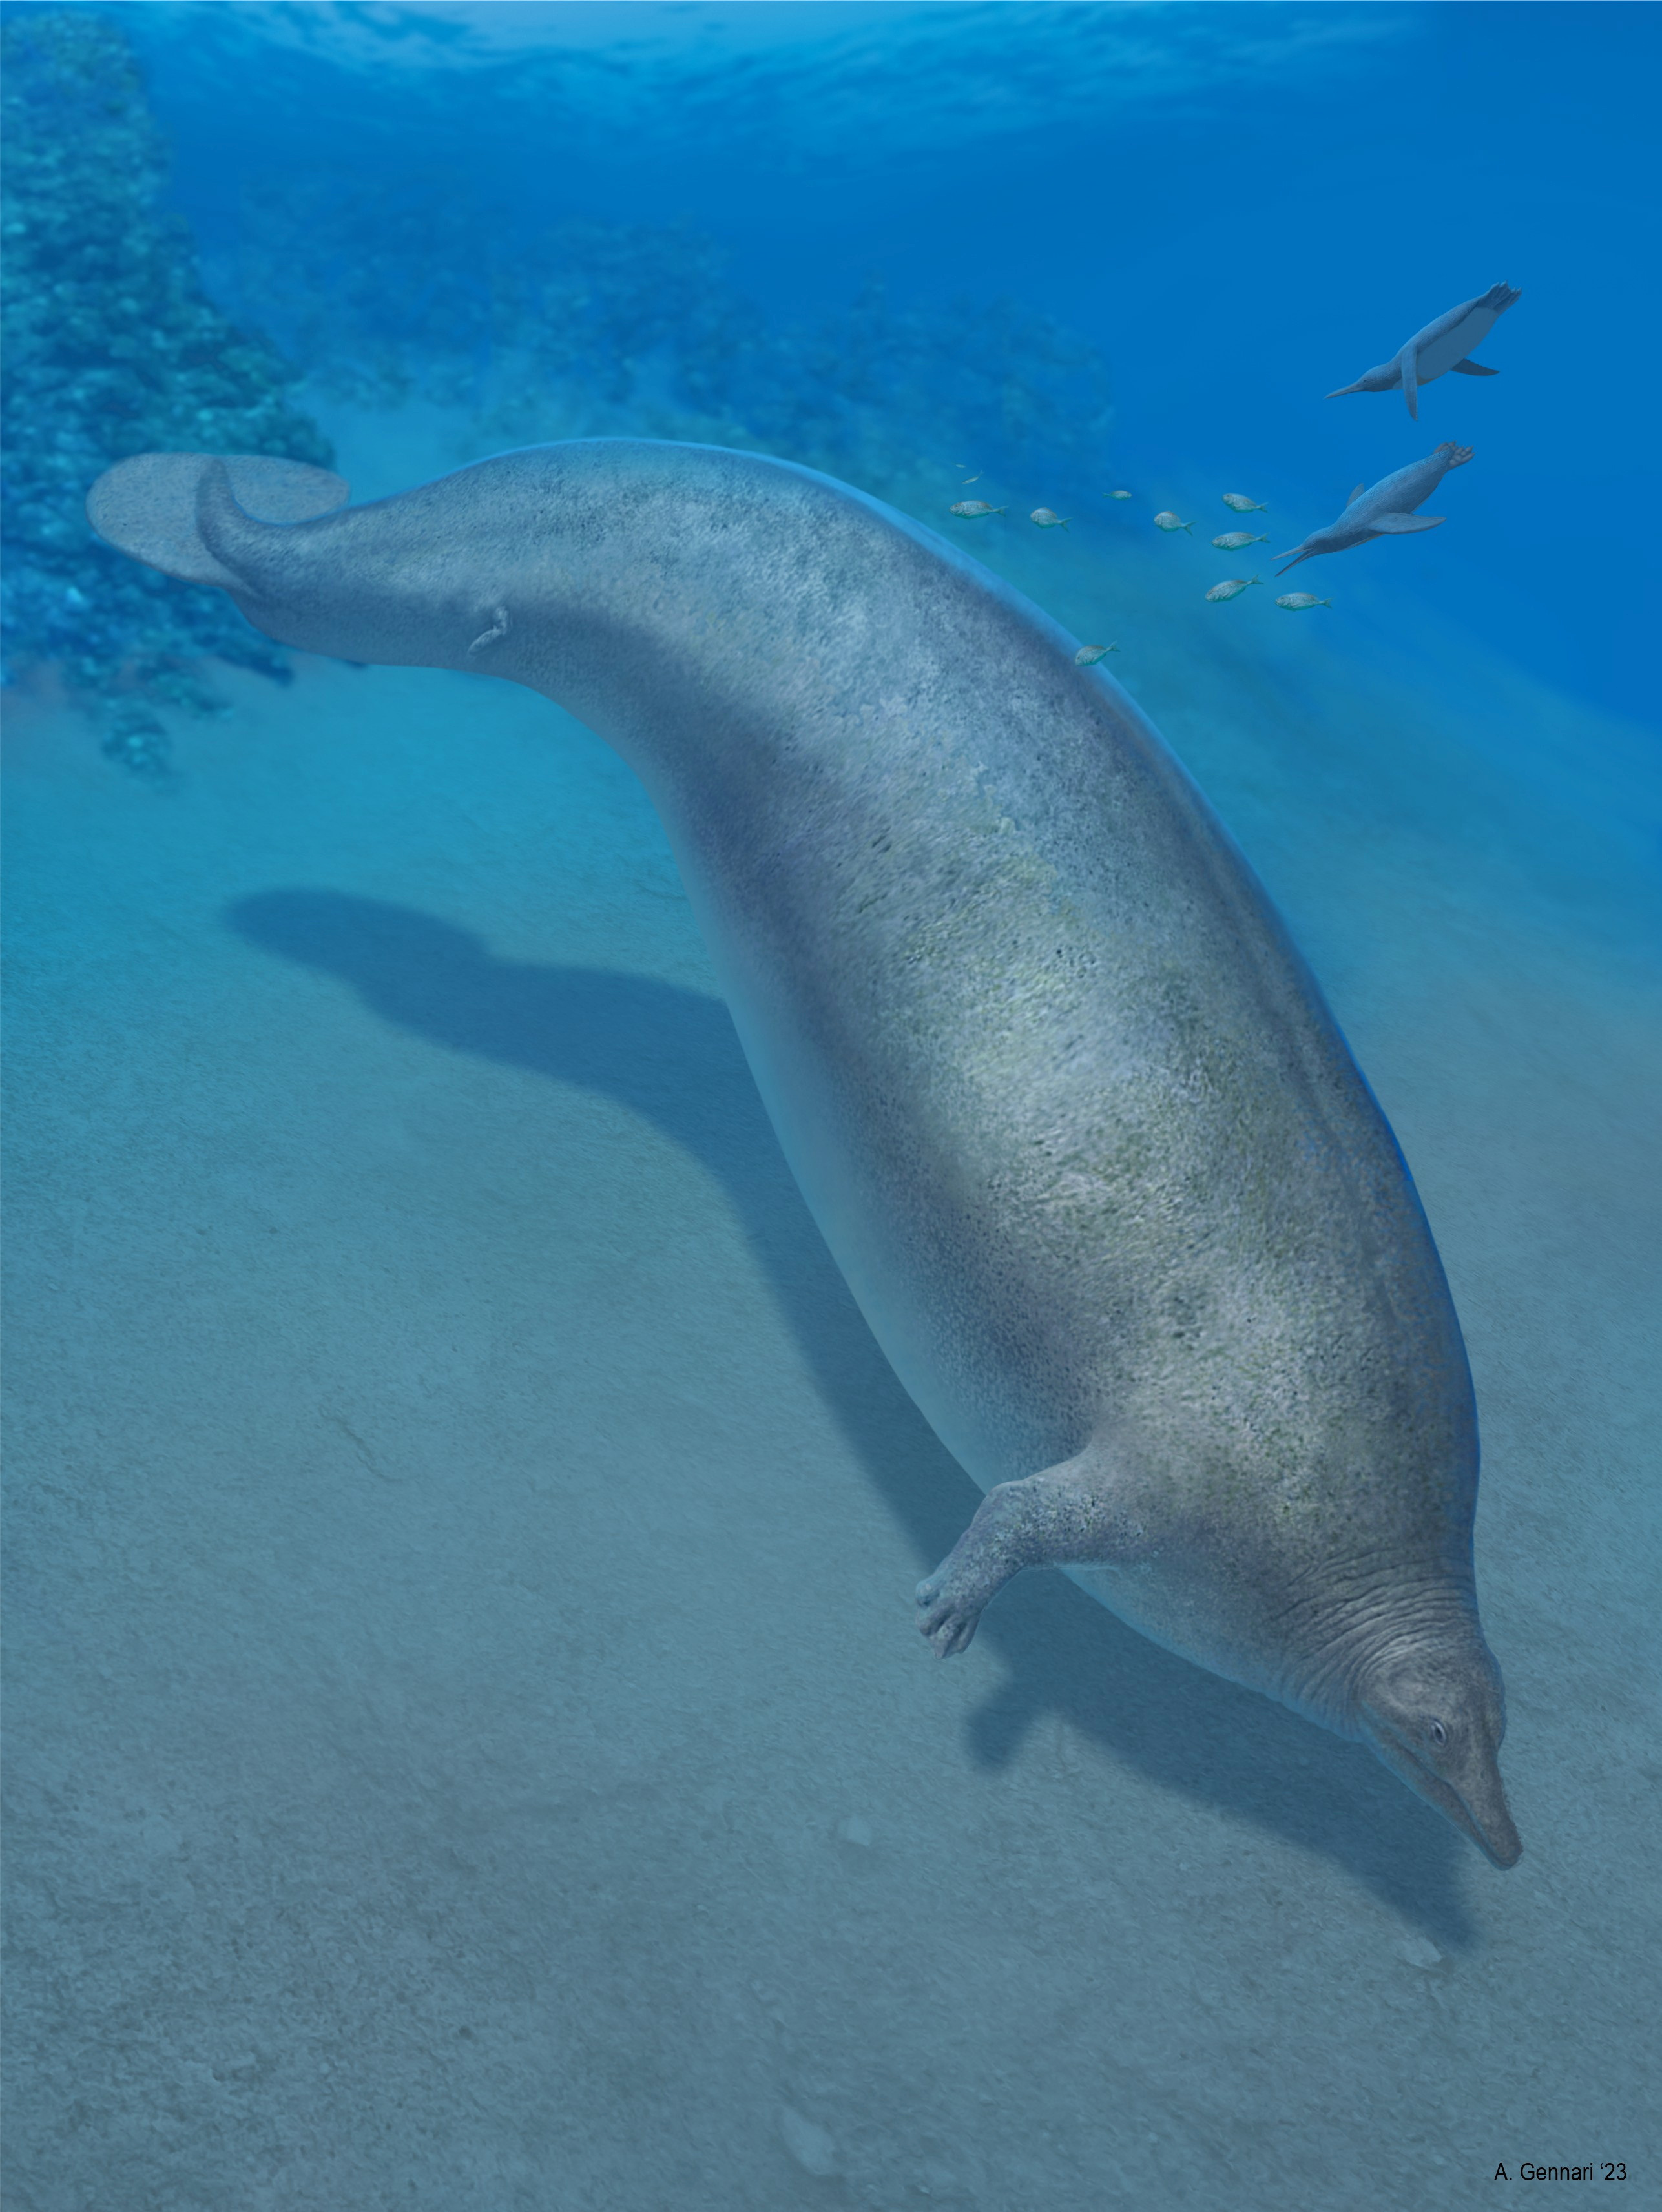  a marine mammal built somewhat like a manatee under the water casting a shadow on the ocean floor